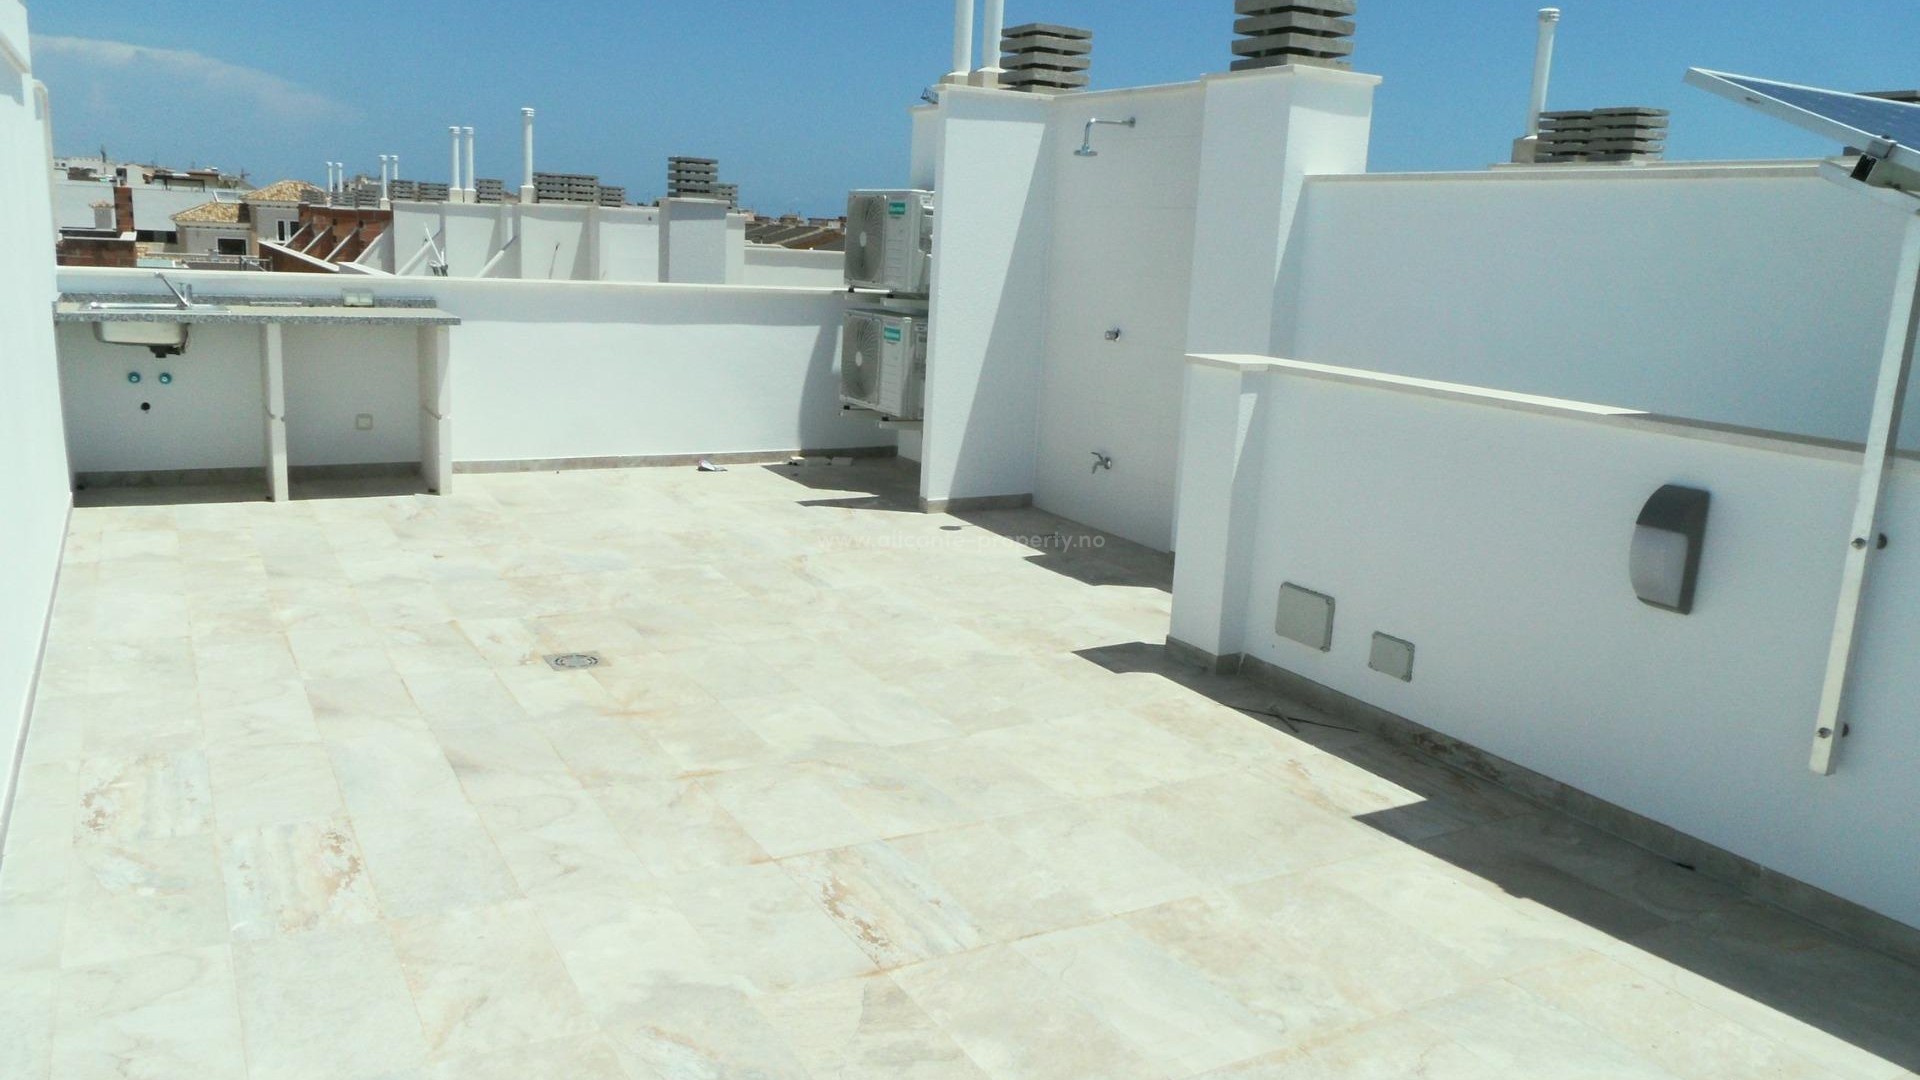 Townhouse in Pilar de La Horadada, 3 bedrooms, 2 bathrooms, terraces and large rooftop solarium. Communal swimming pool and car park. 5 min to beaches